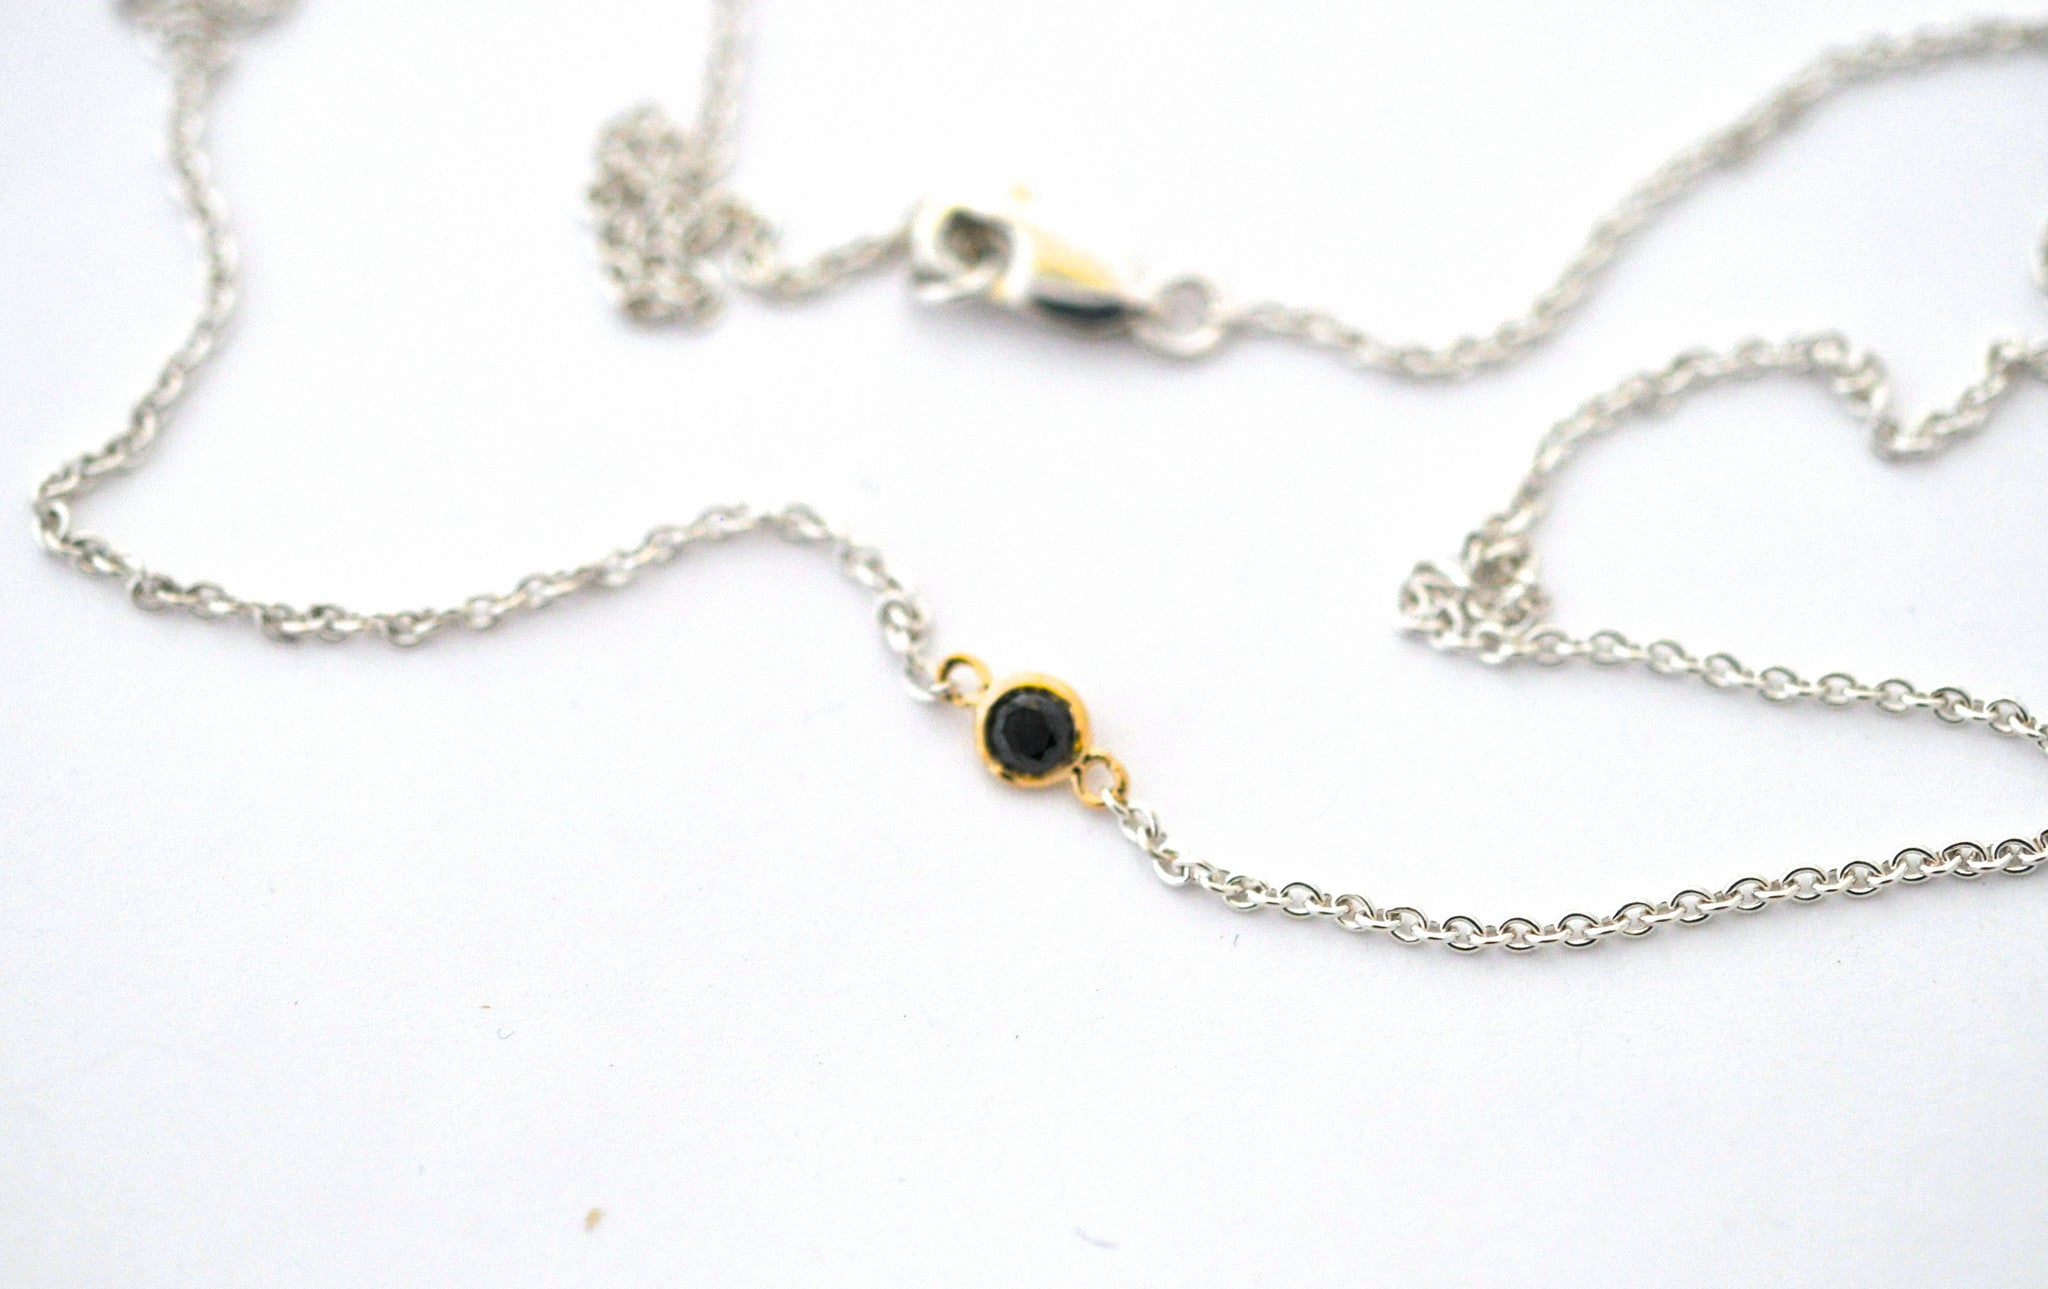 necklace / silver + small gemstone in gold bezel